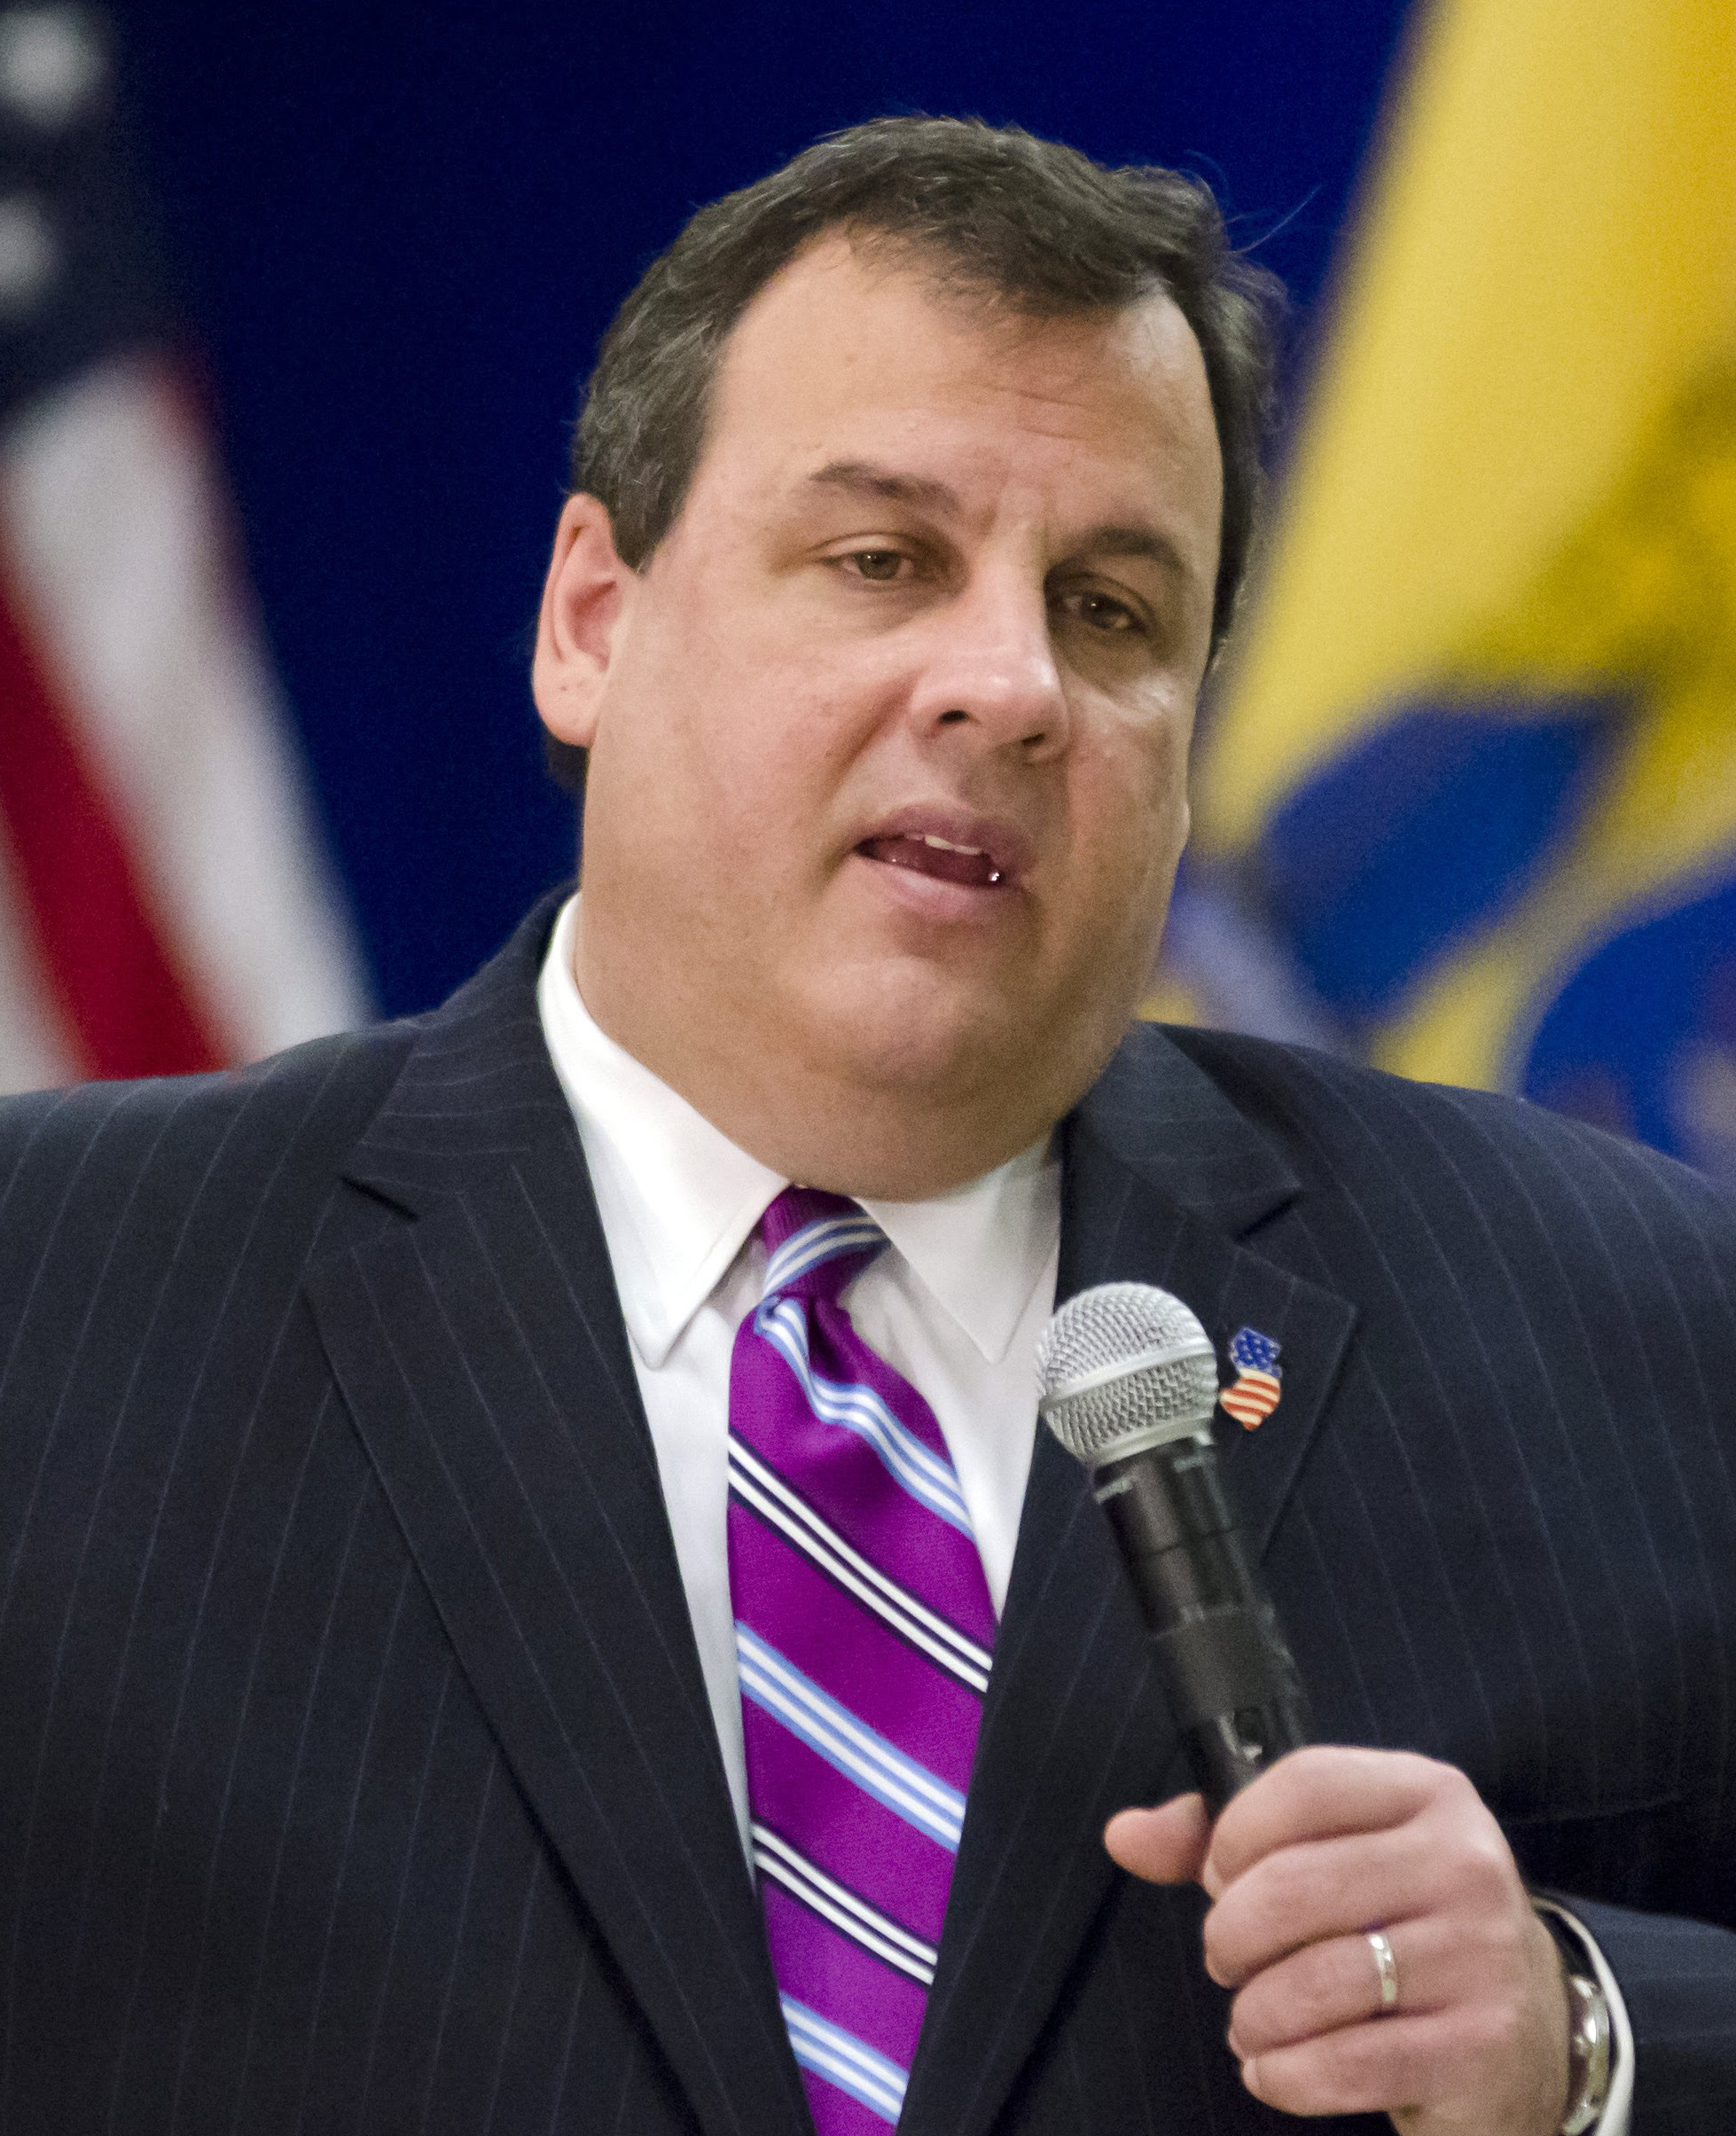 http://upload.wikimedia.org/wikipedia/commons/e/ee/Chris_Christie_at_townhall.jpg